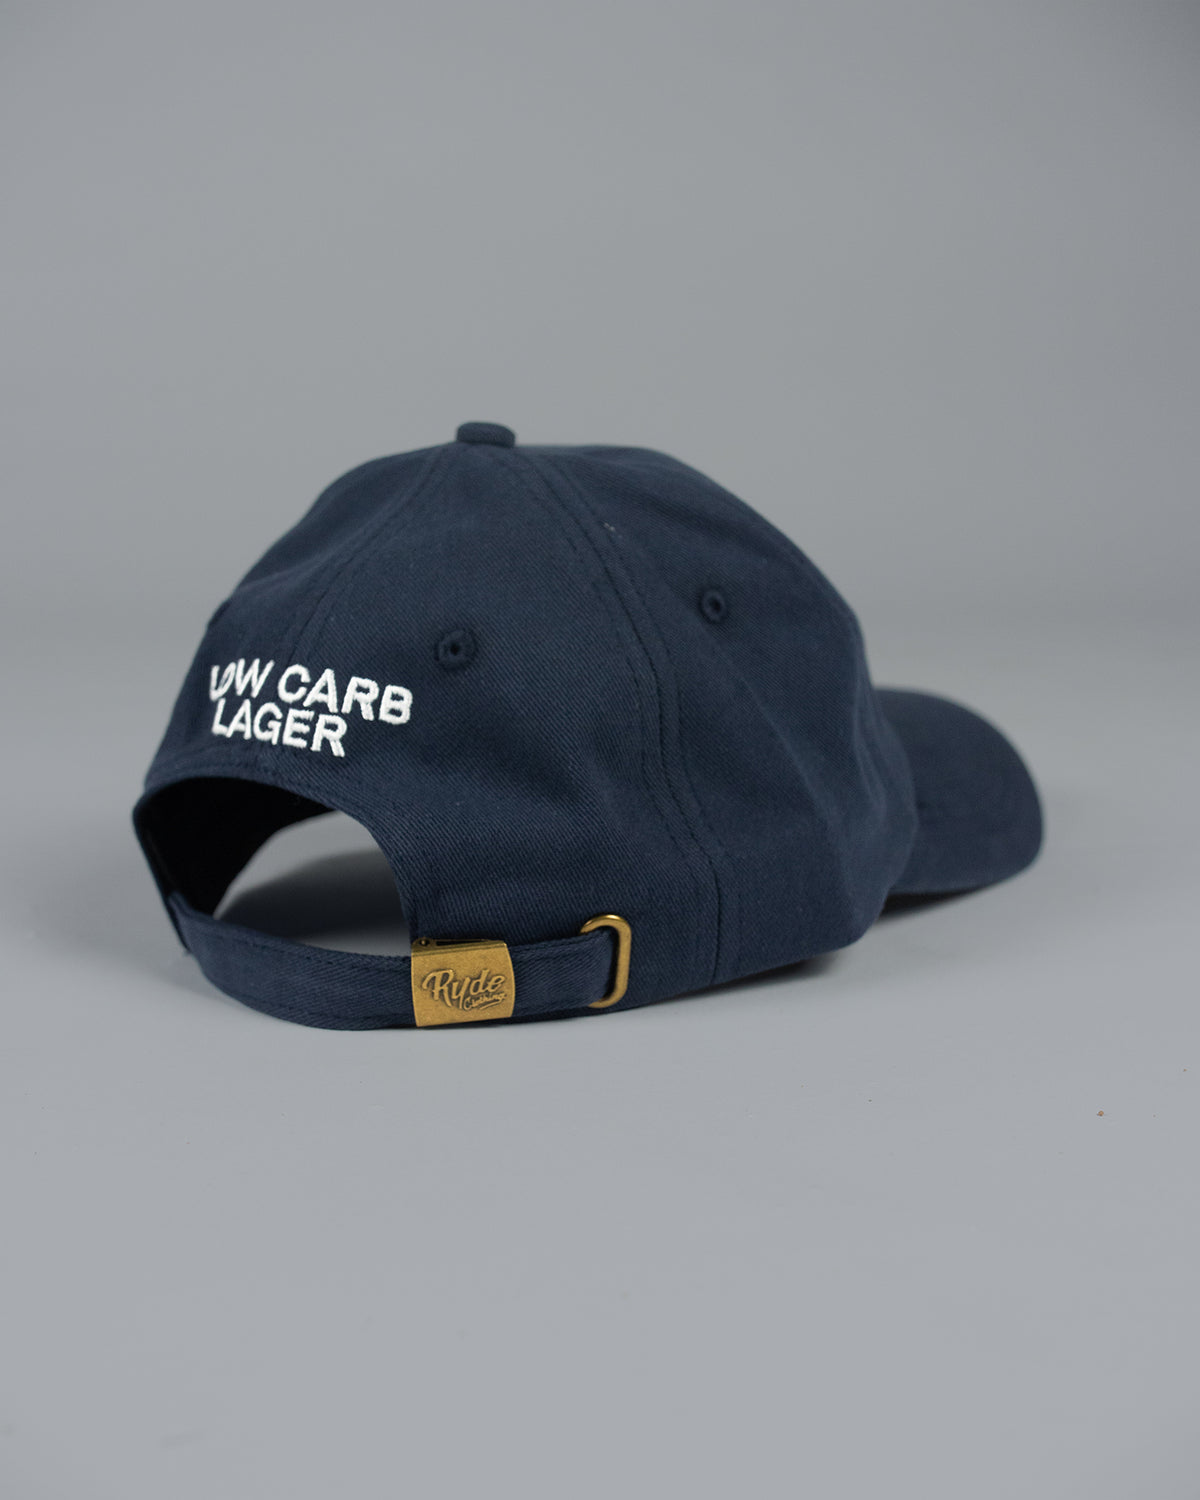 Ryde x Woolshed Brewery Cap